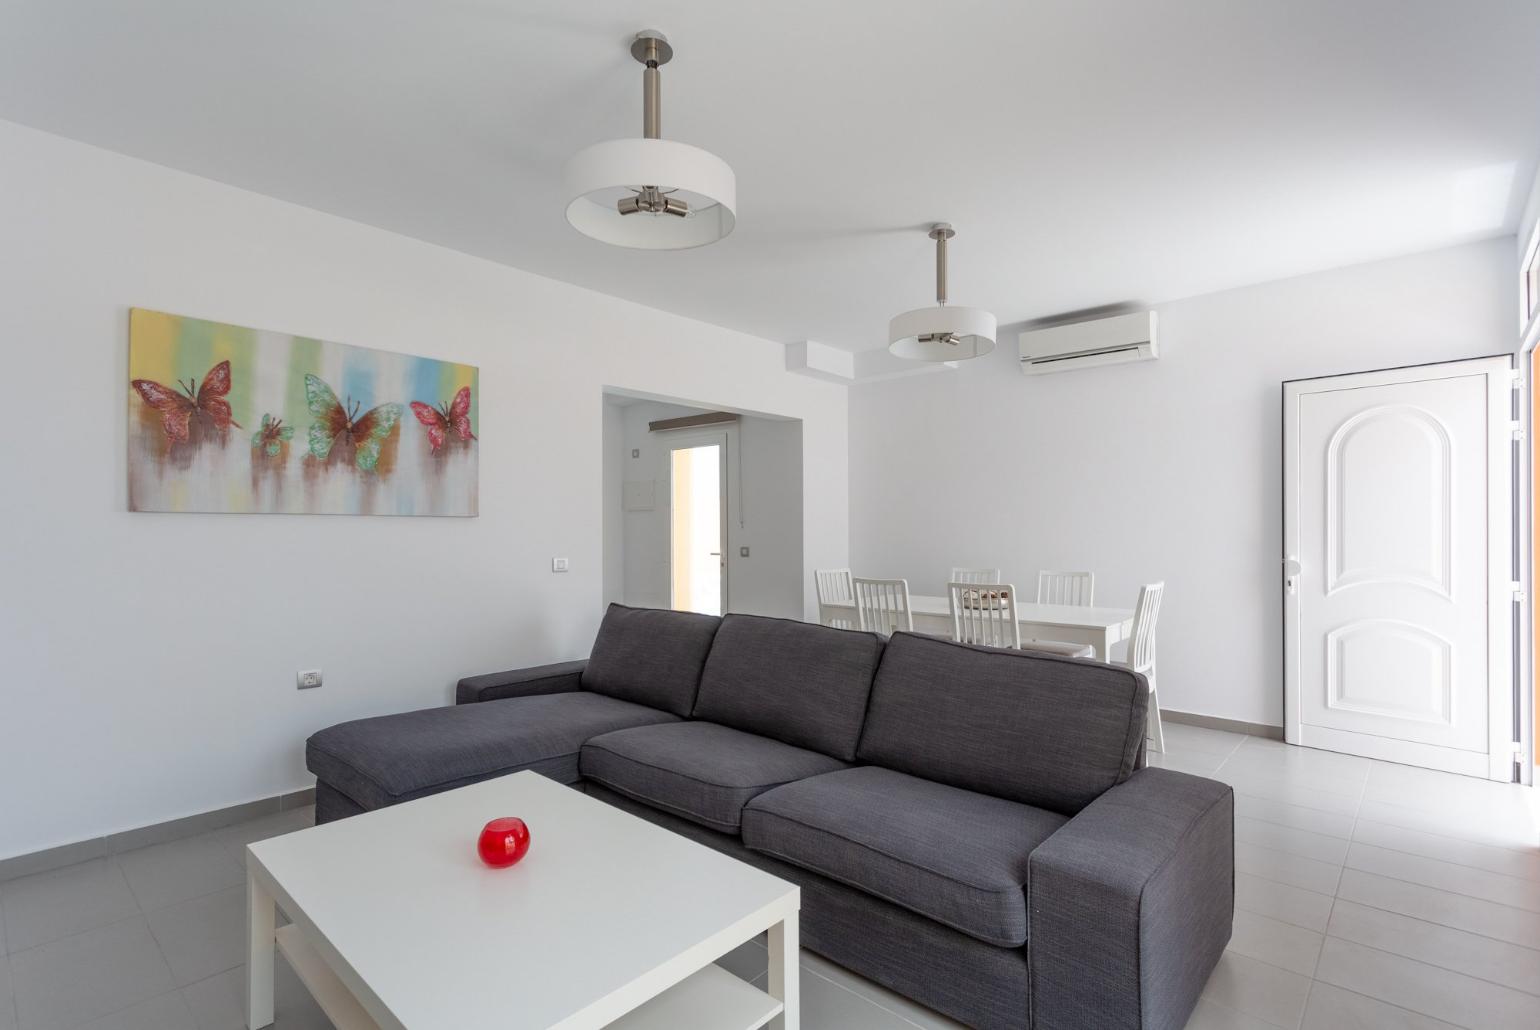 The Air Conditioned living room with sofas, WiFi Internet, Satellite TV and dining area.